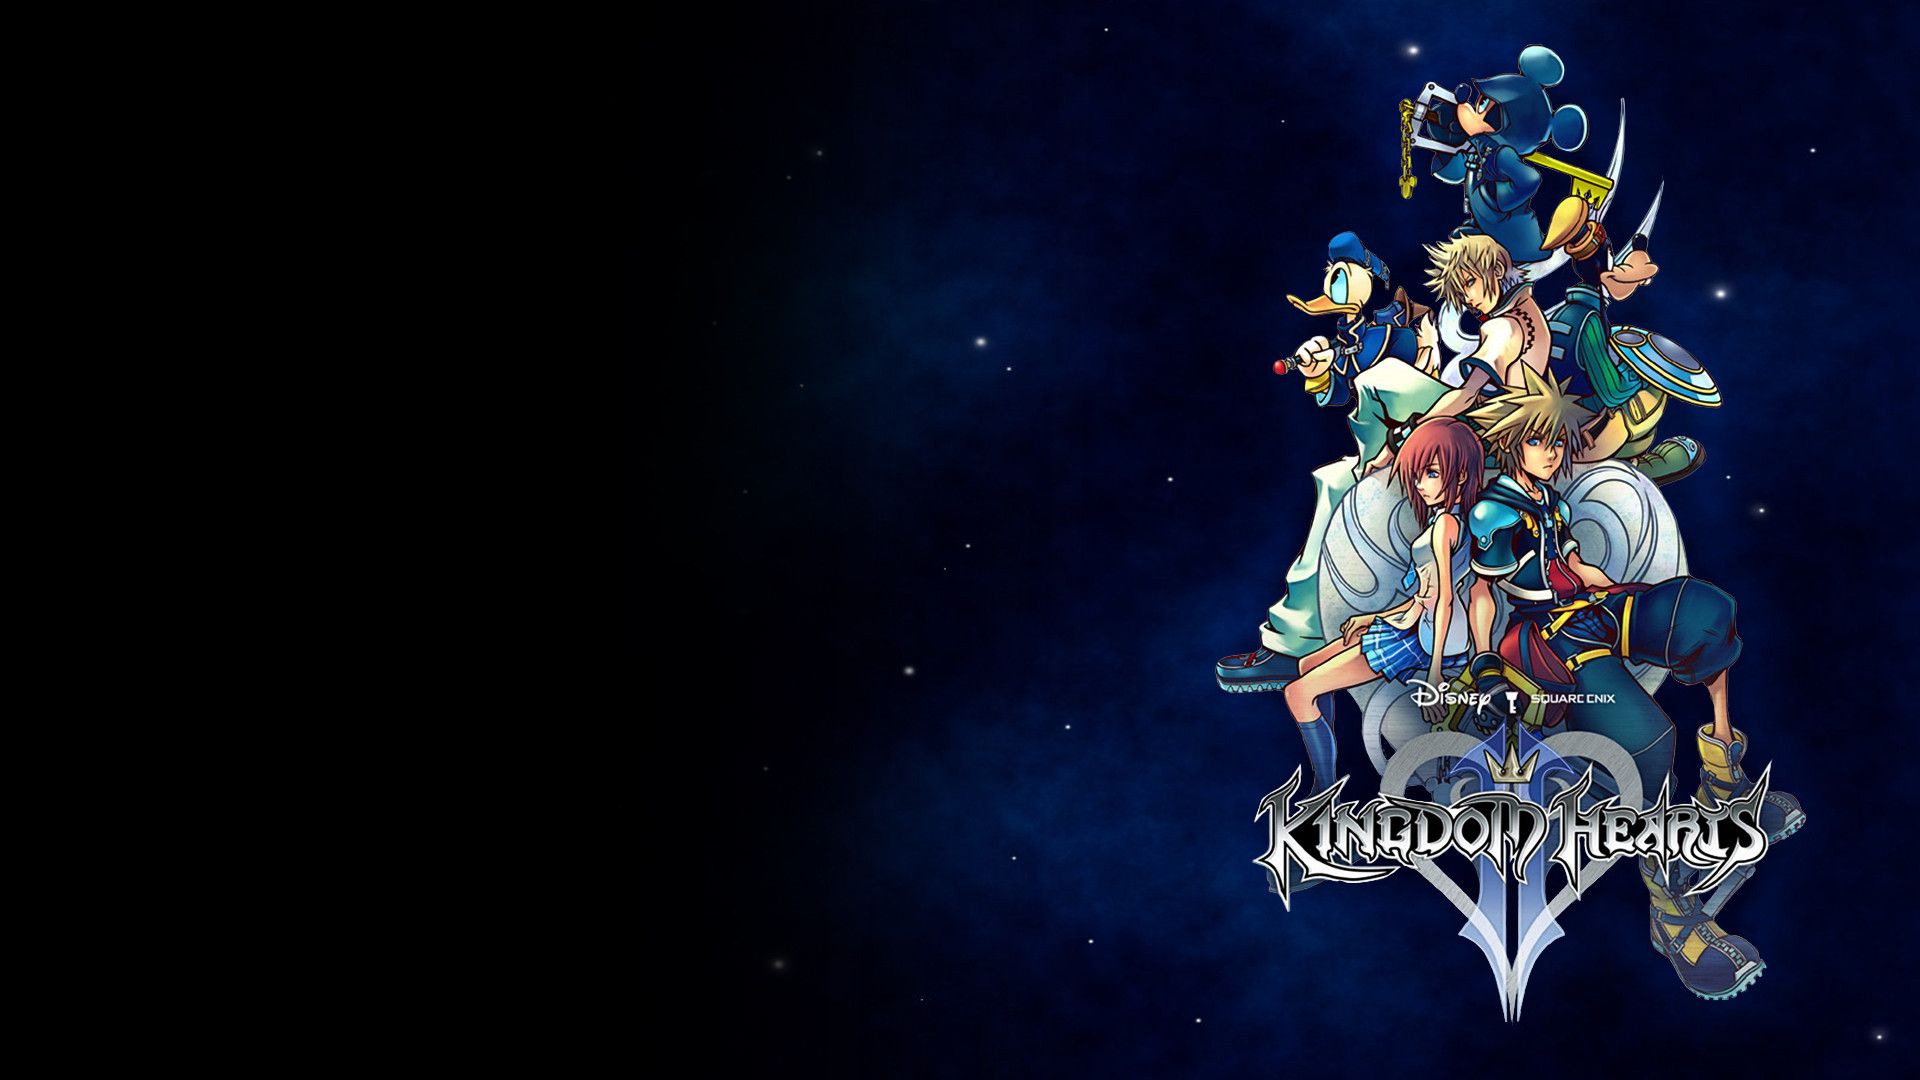 Here is a collection of Kingdom Hearts wallpapers that I compiled ...